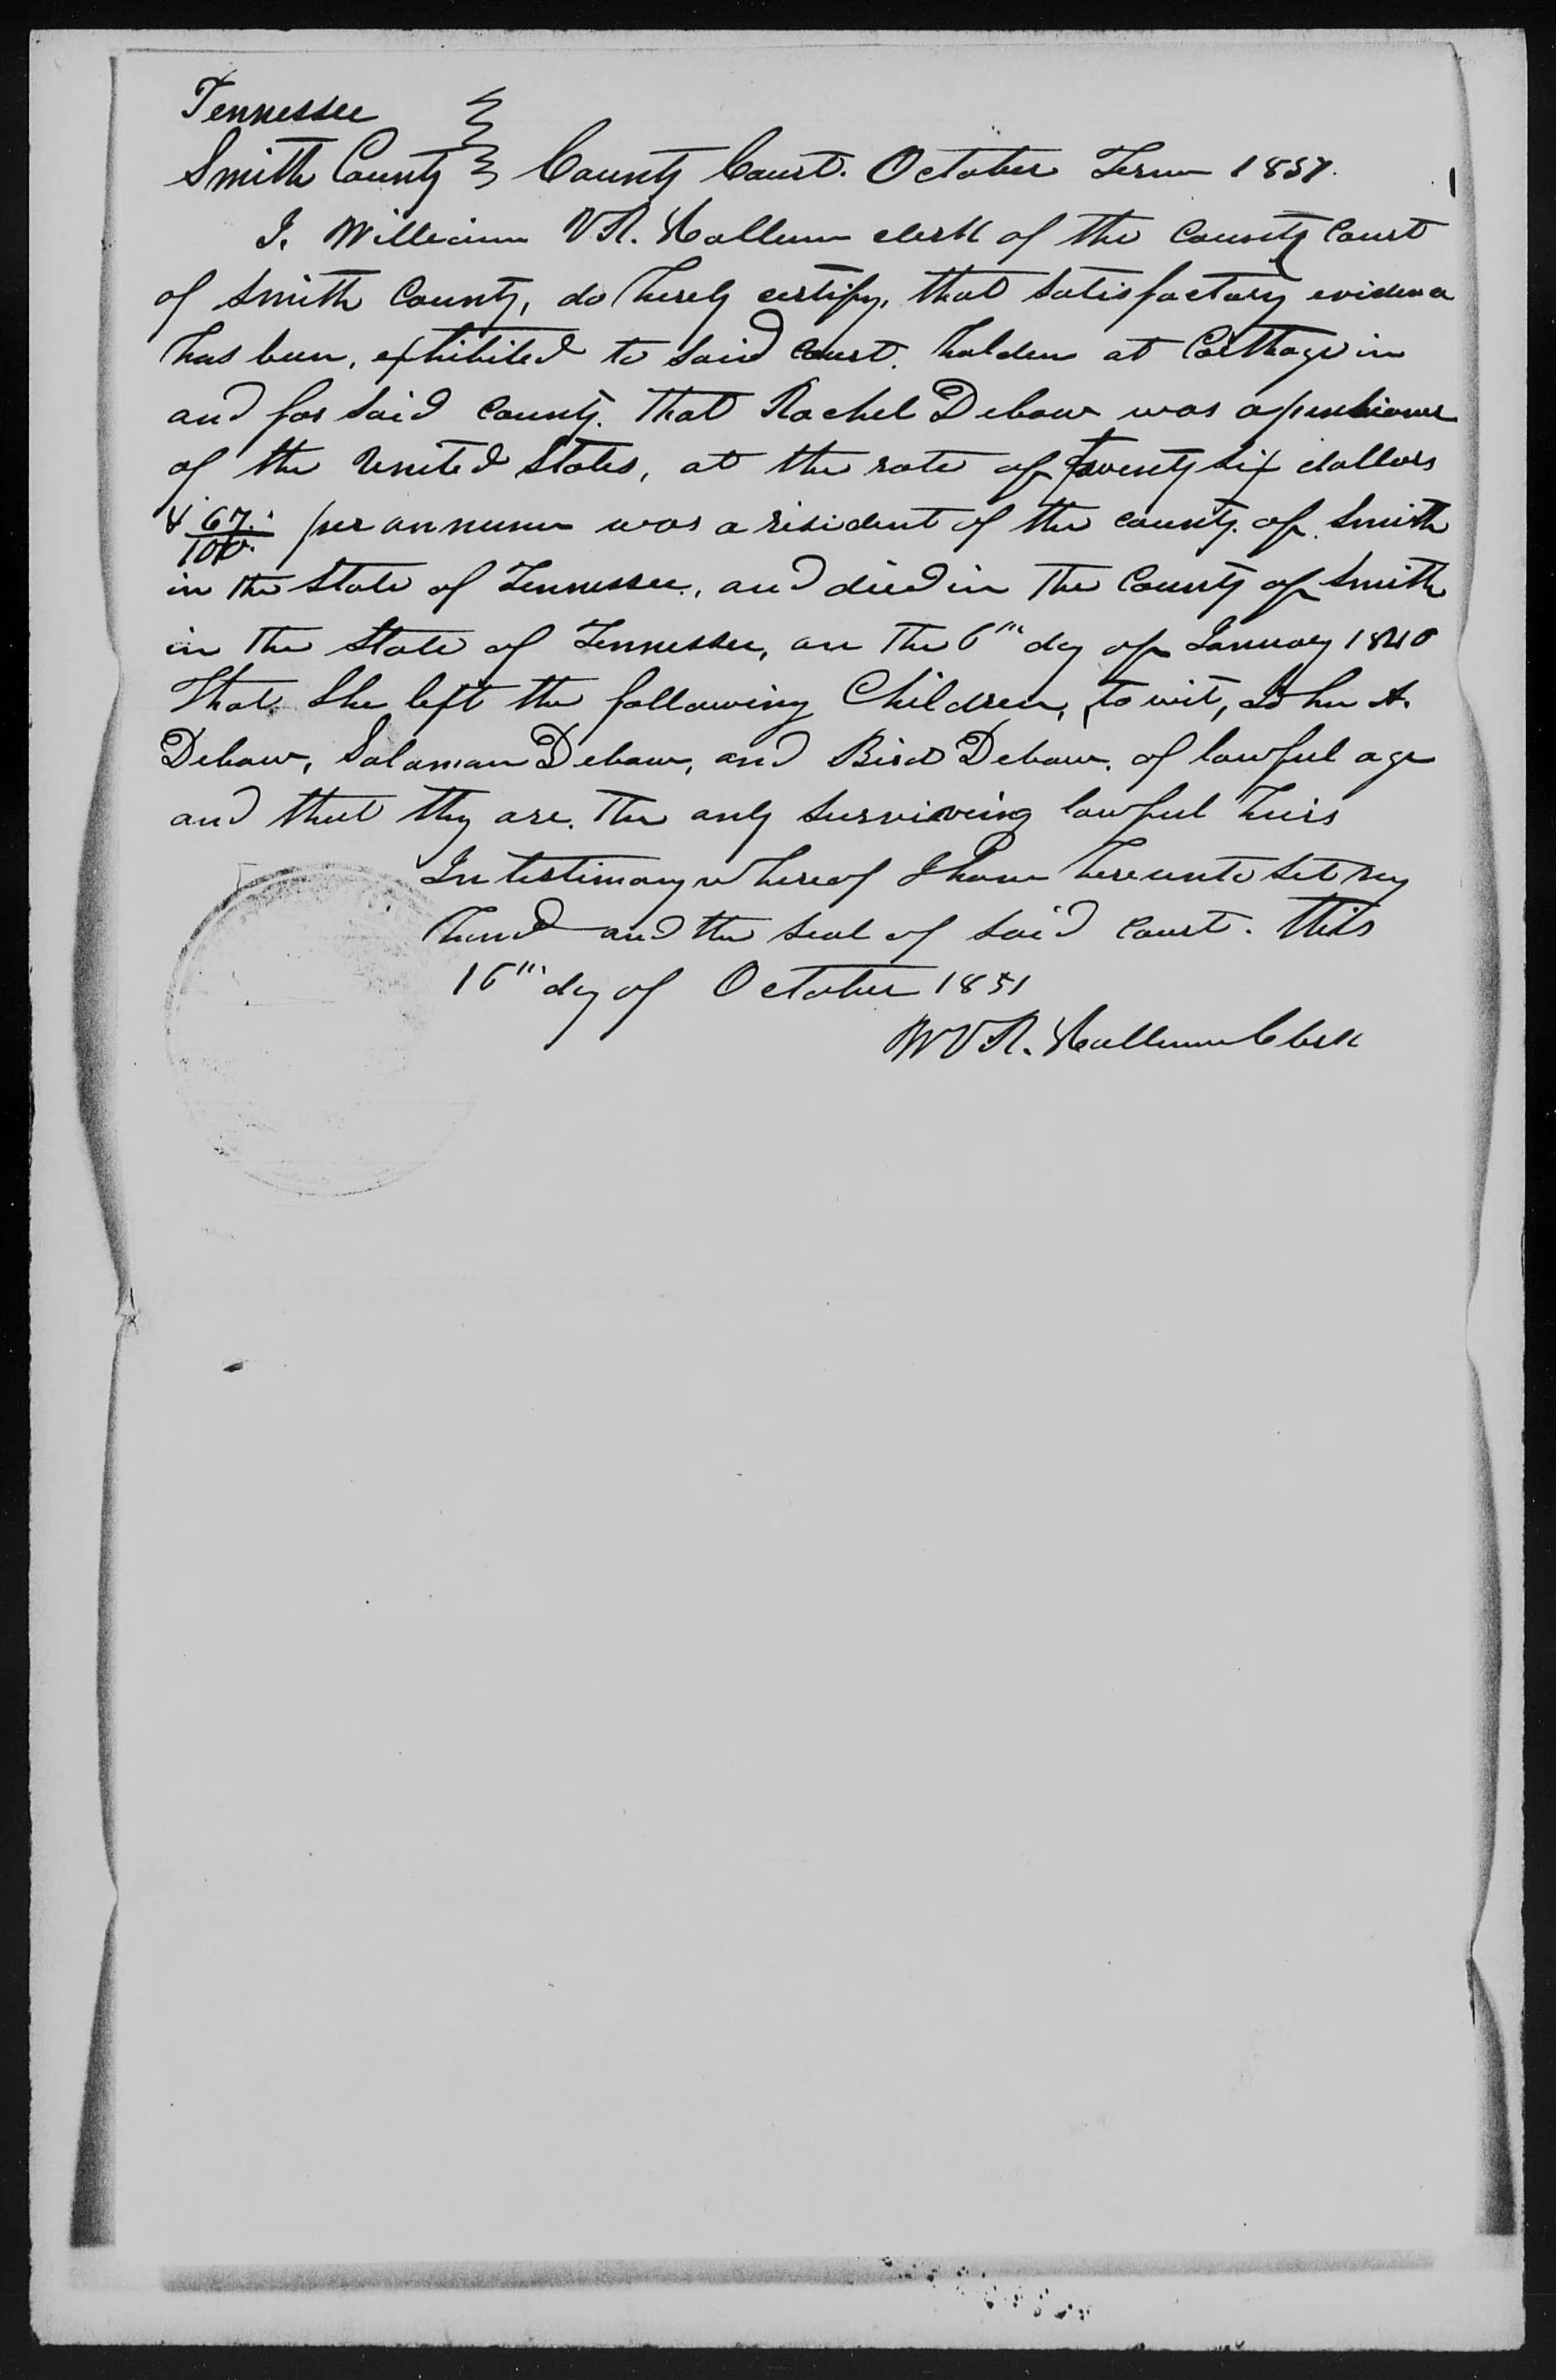 Affidavit of William V. R. Hallum in support of a Pension Claim for Rachel Debow, 16 October 1851, page 1